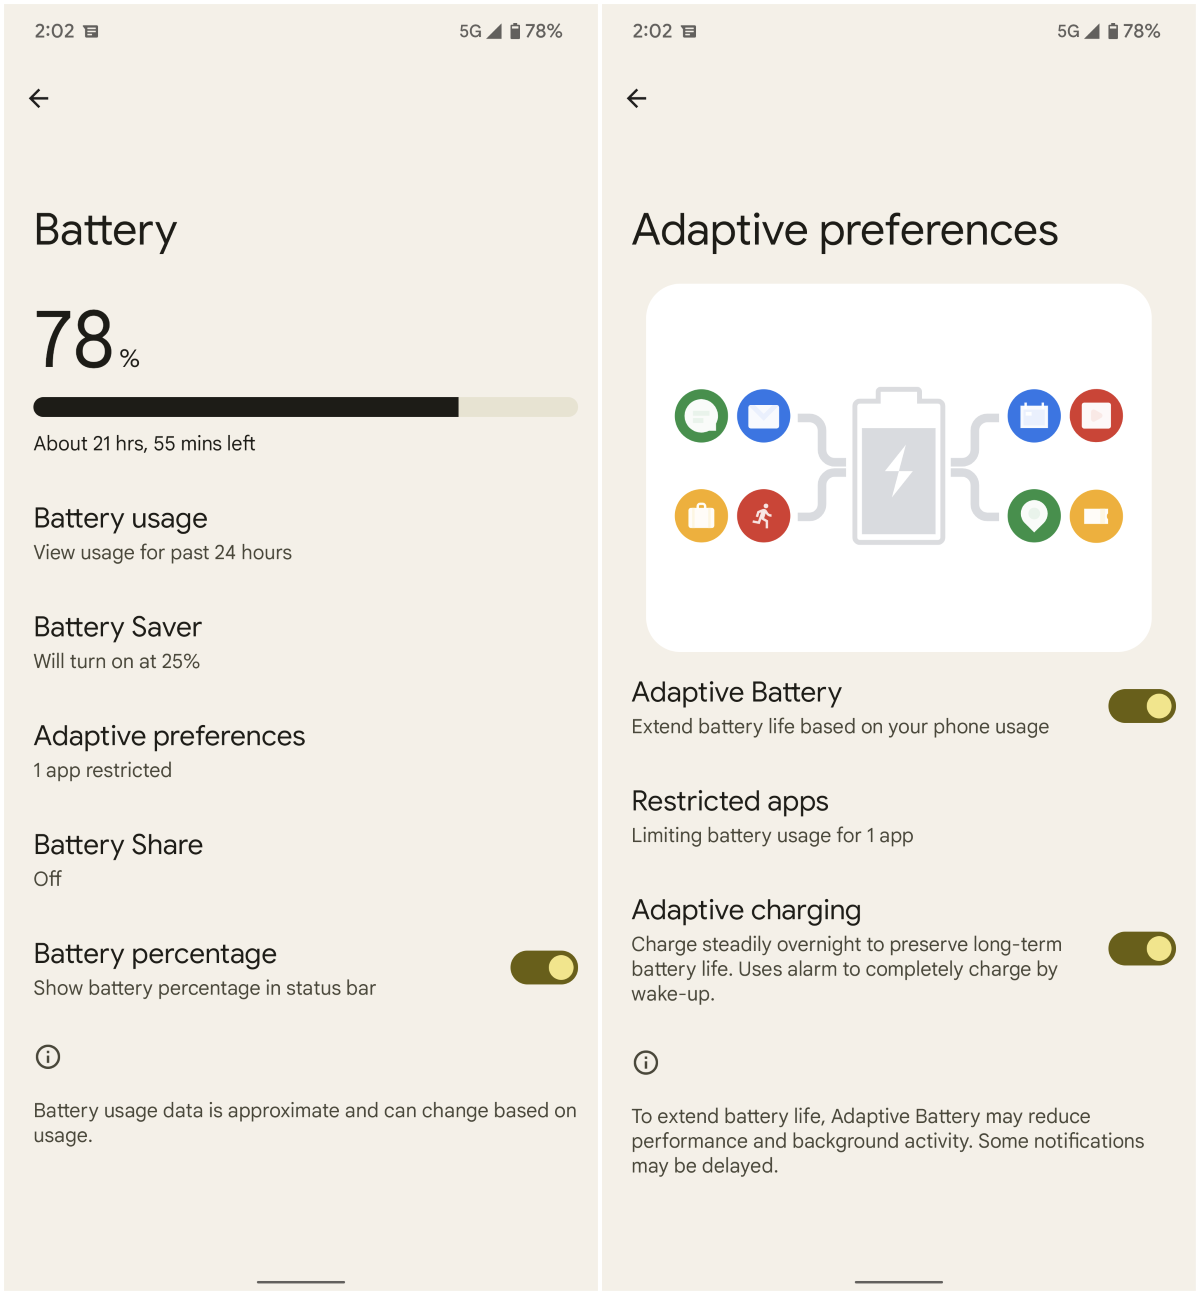 Adaptive battery preferences in Android